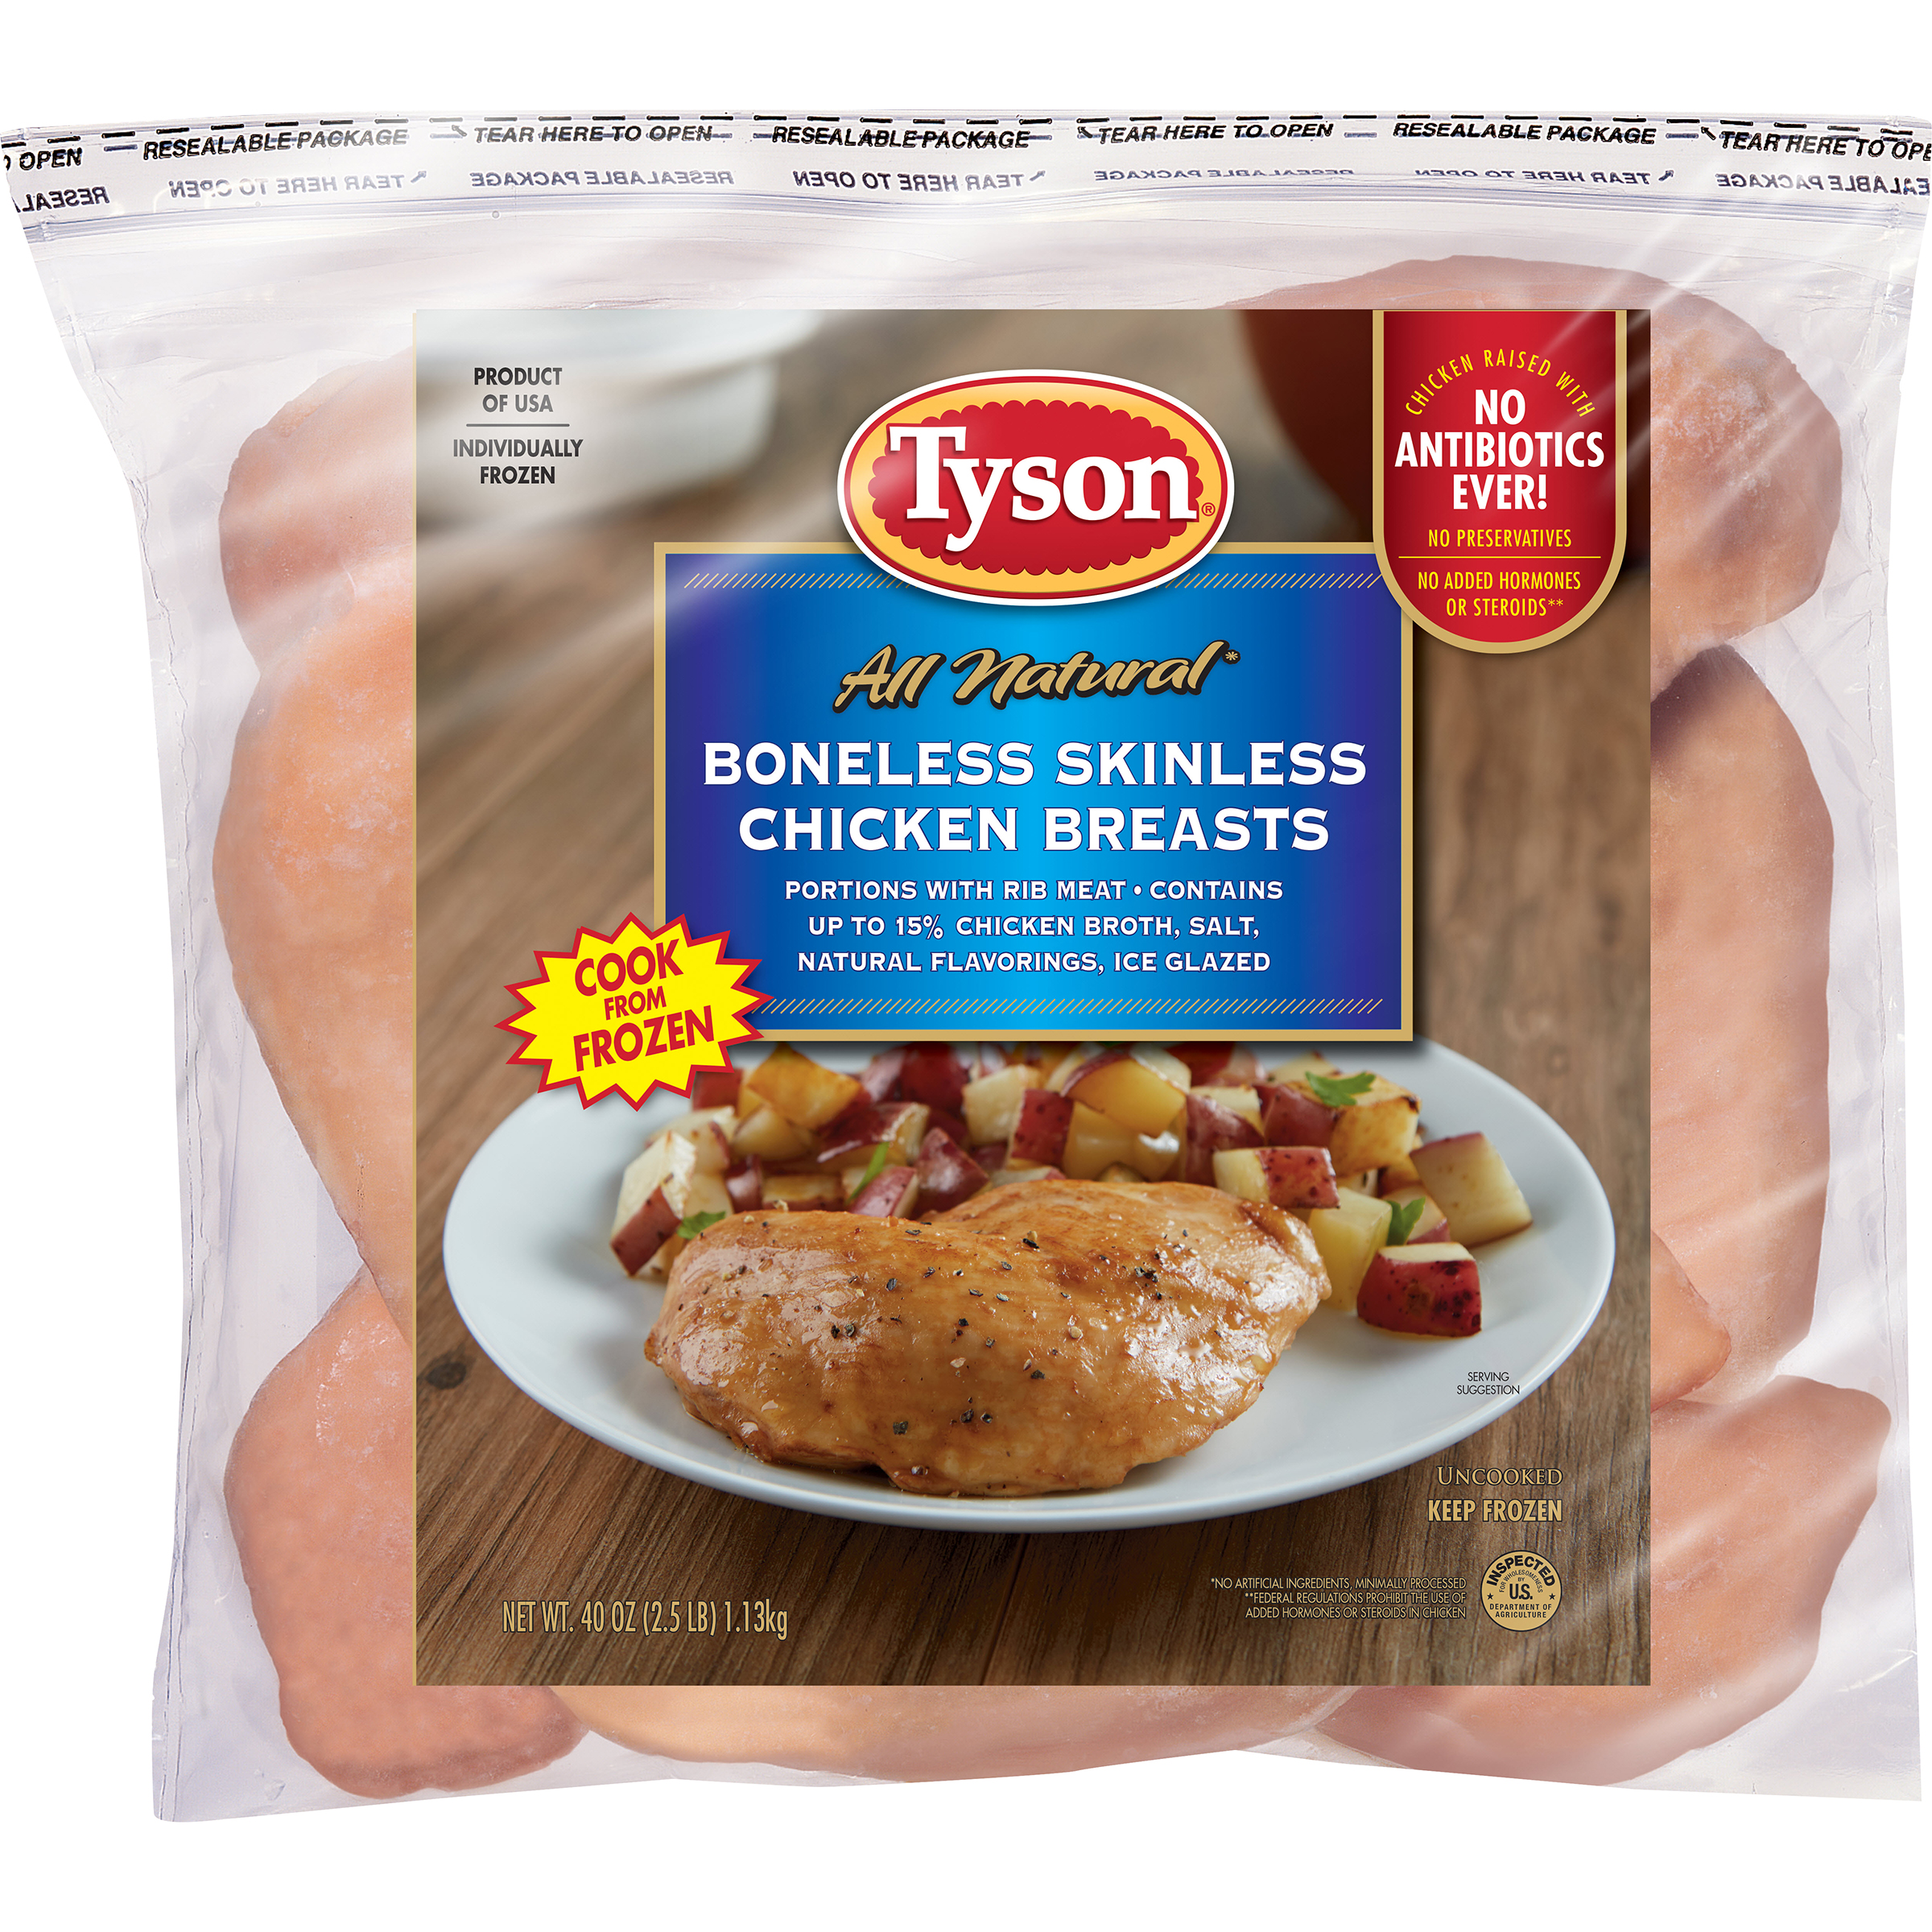 Tyson 100% All Natural Chicken Breasts, Boneless Skinless, with Rib Meat, 40 oz (2.5 lb) 1.13 kg